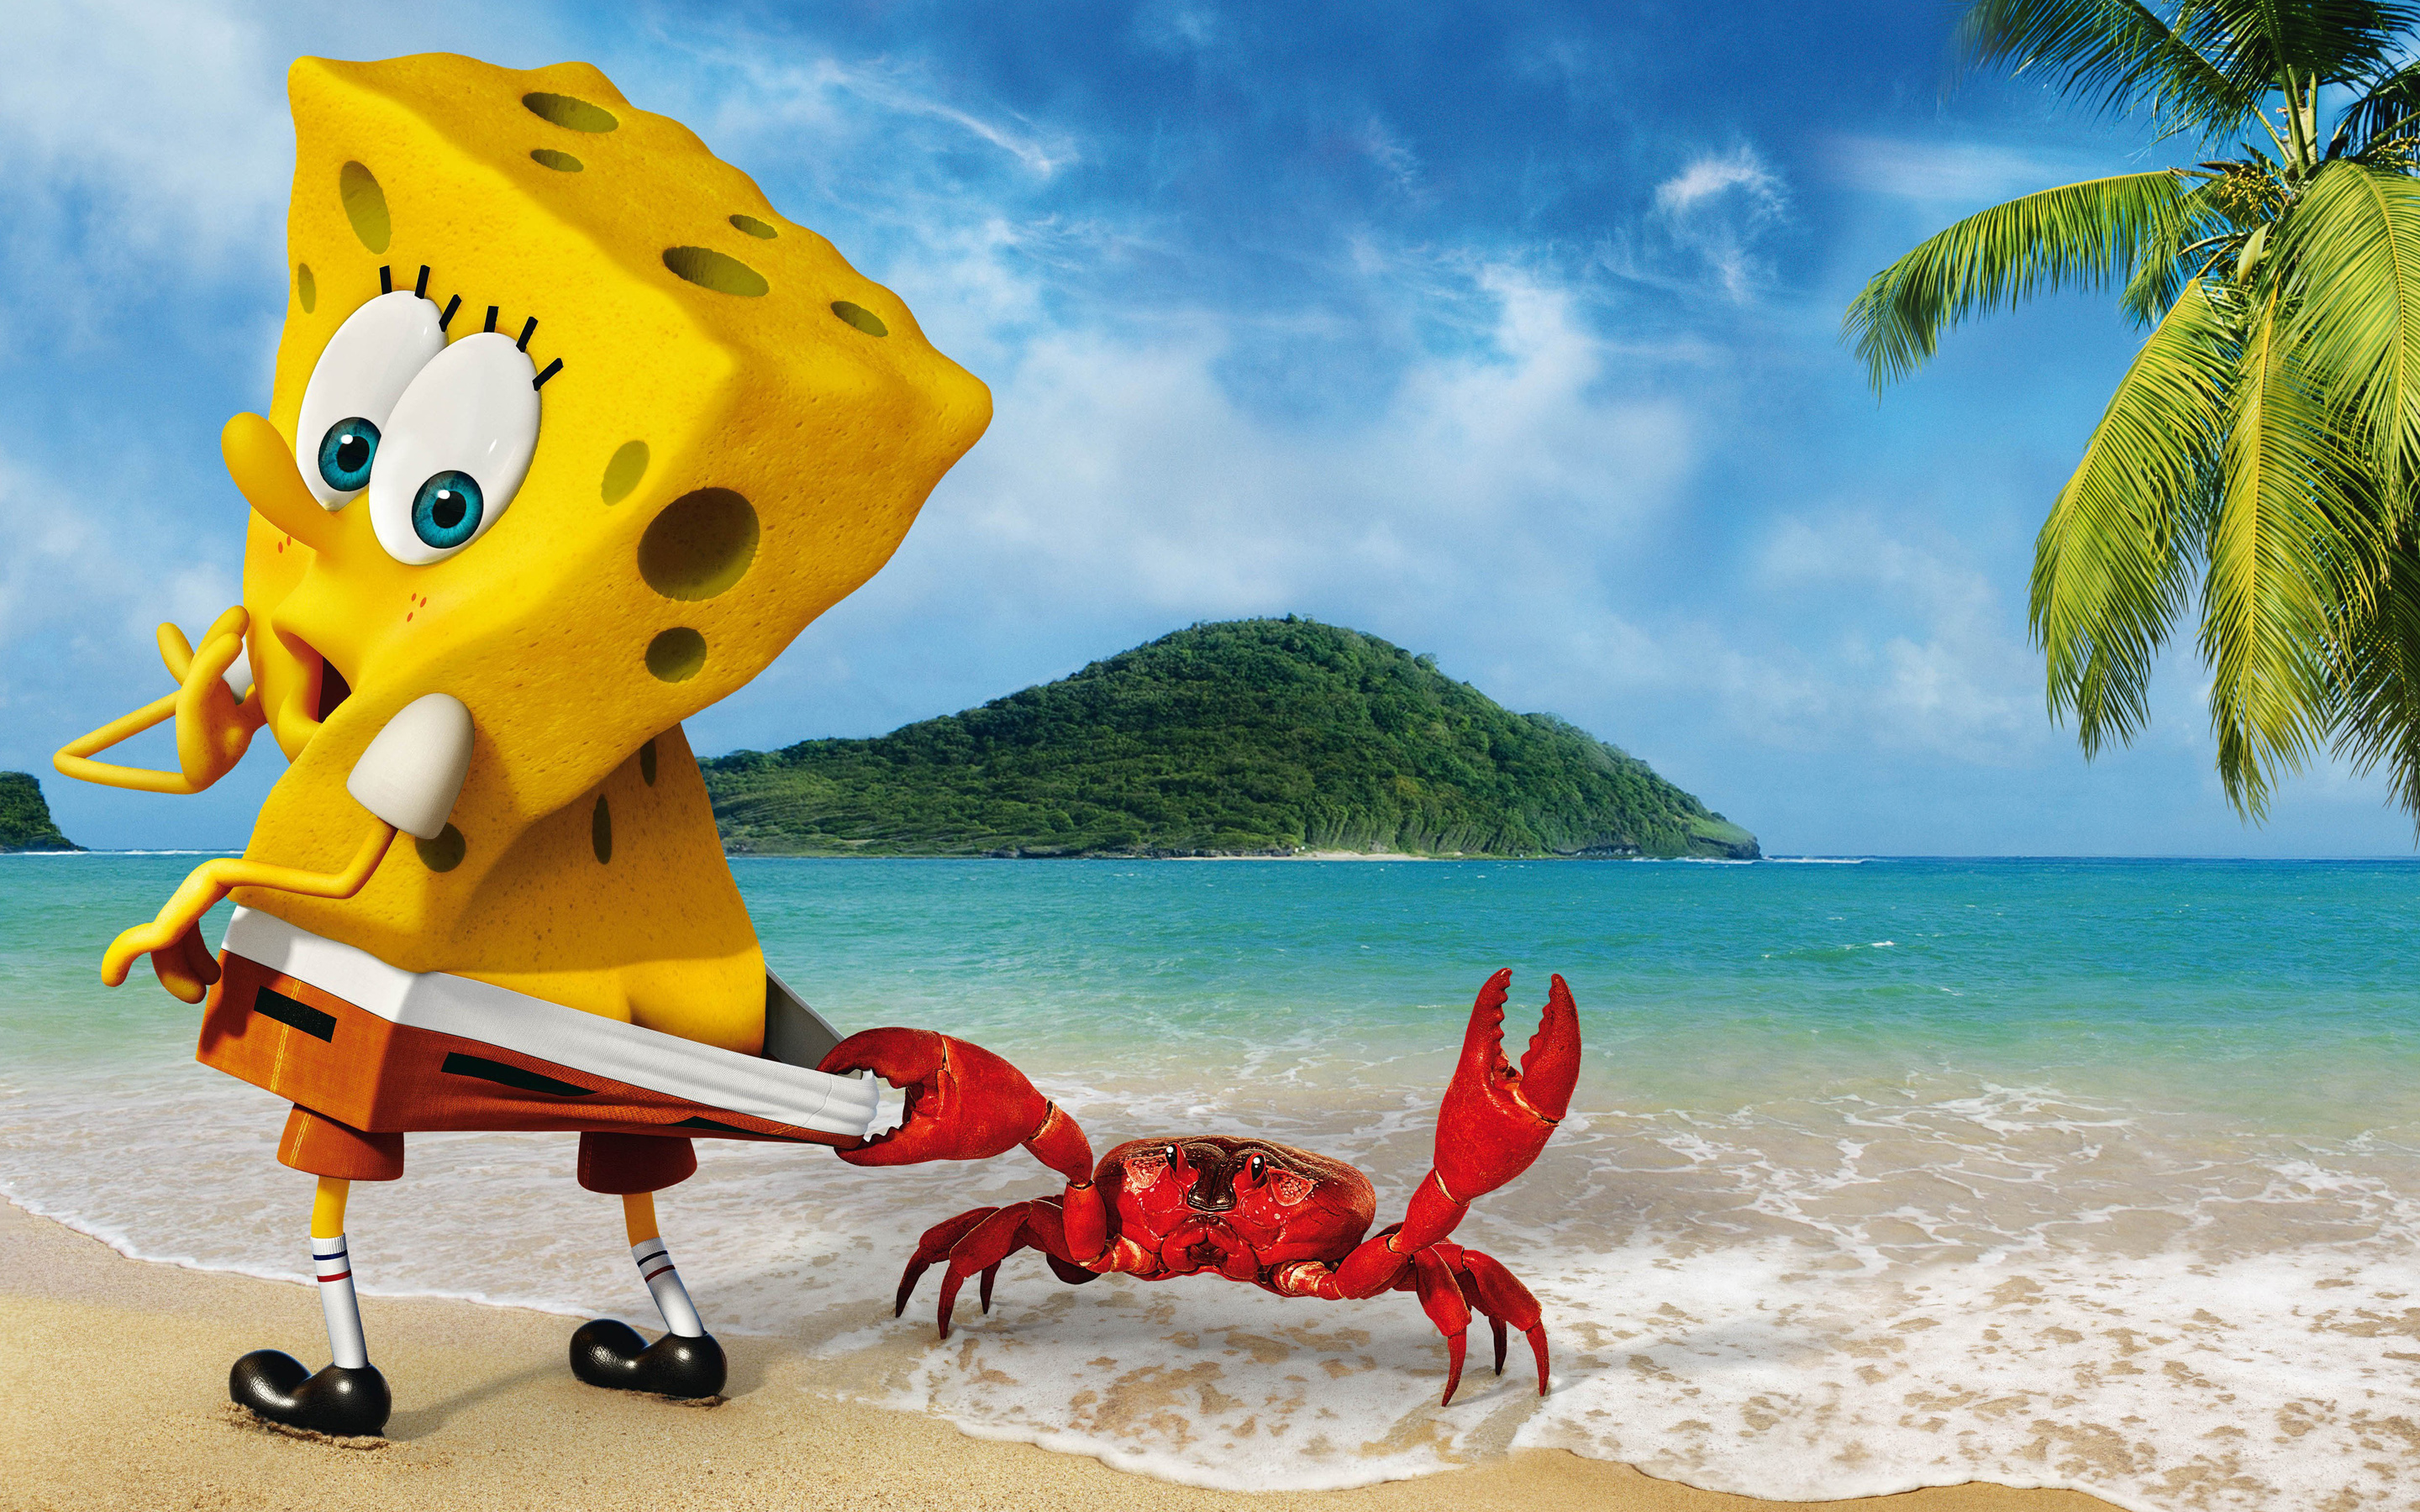 Spongebob 4k Wallpapers For Your Desktop Or Mobile Screen Free And